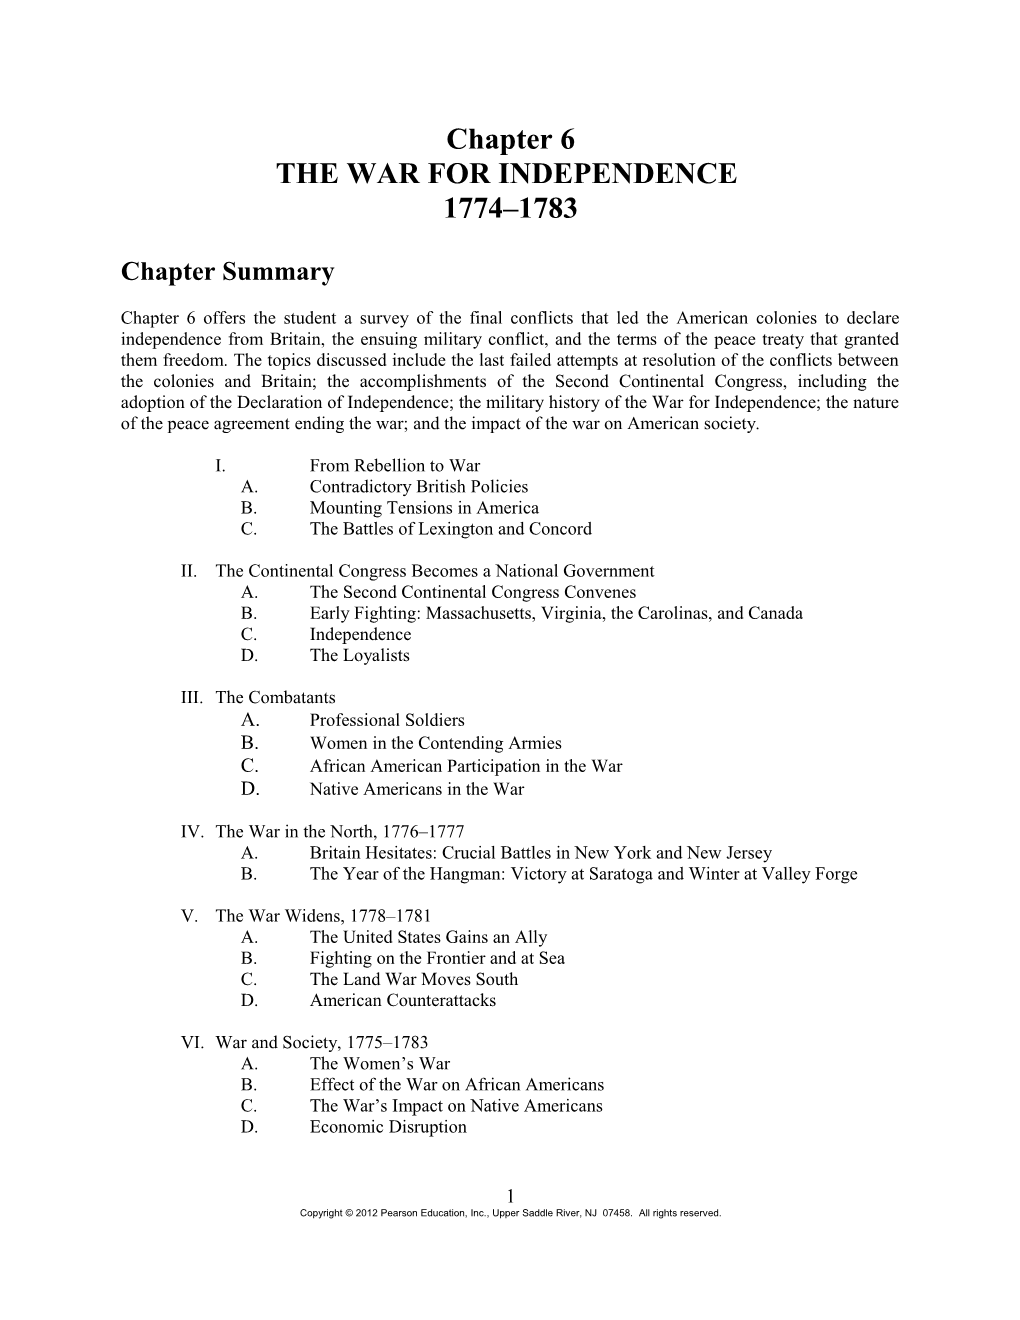 Chapter 6 the War for Independence, 1774-1783